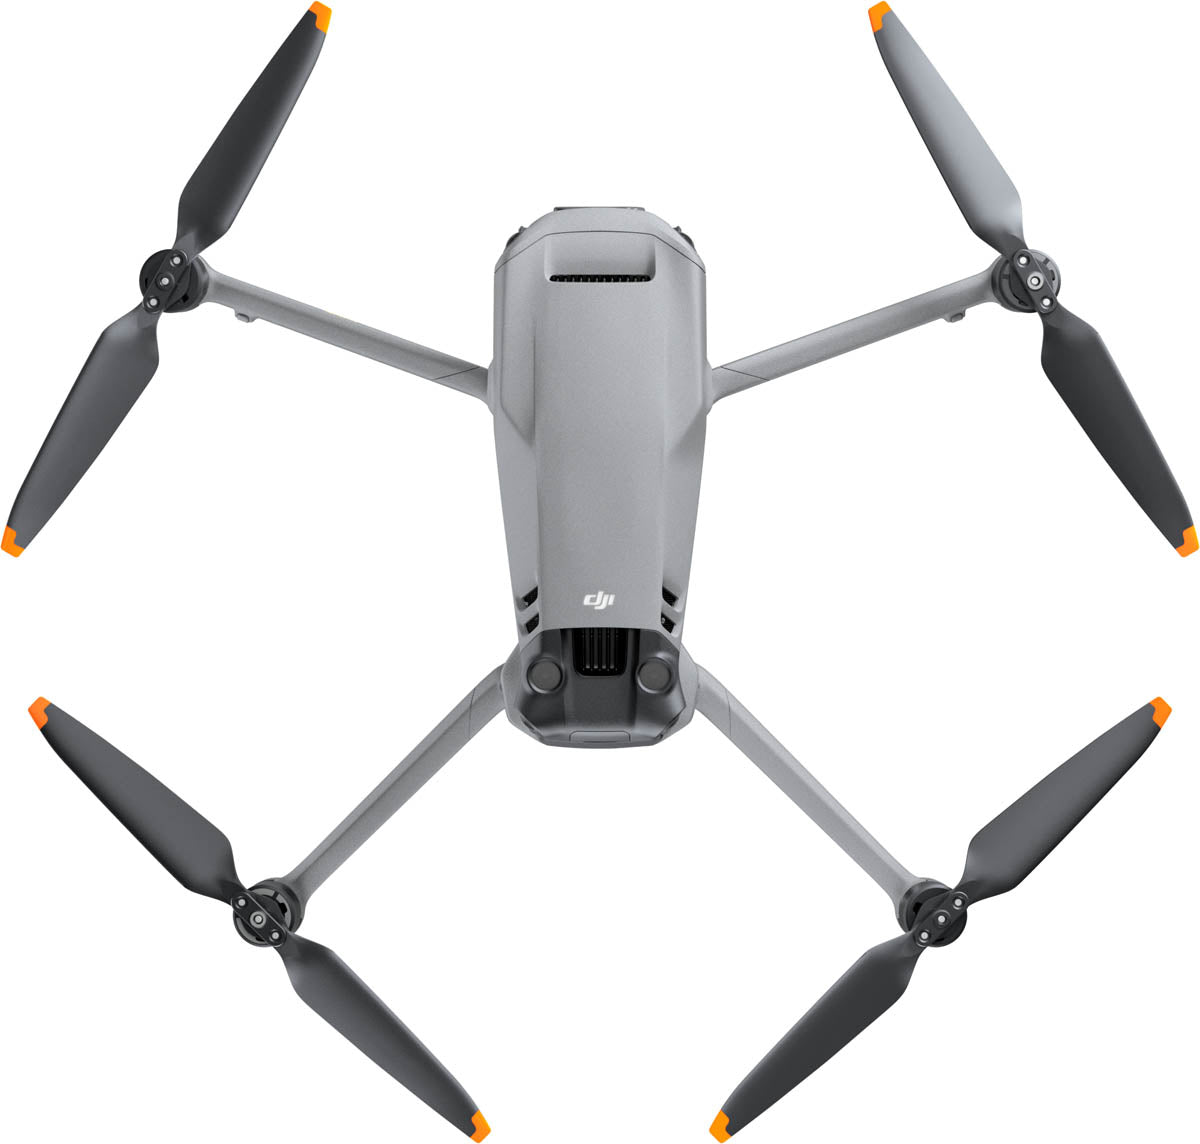 The DJI Avata Is the Most Fun I've Had Flying a Drone -- Even When